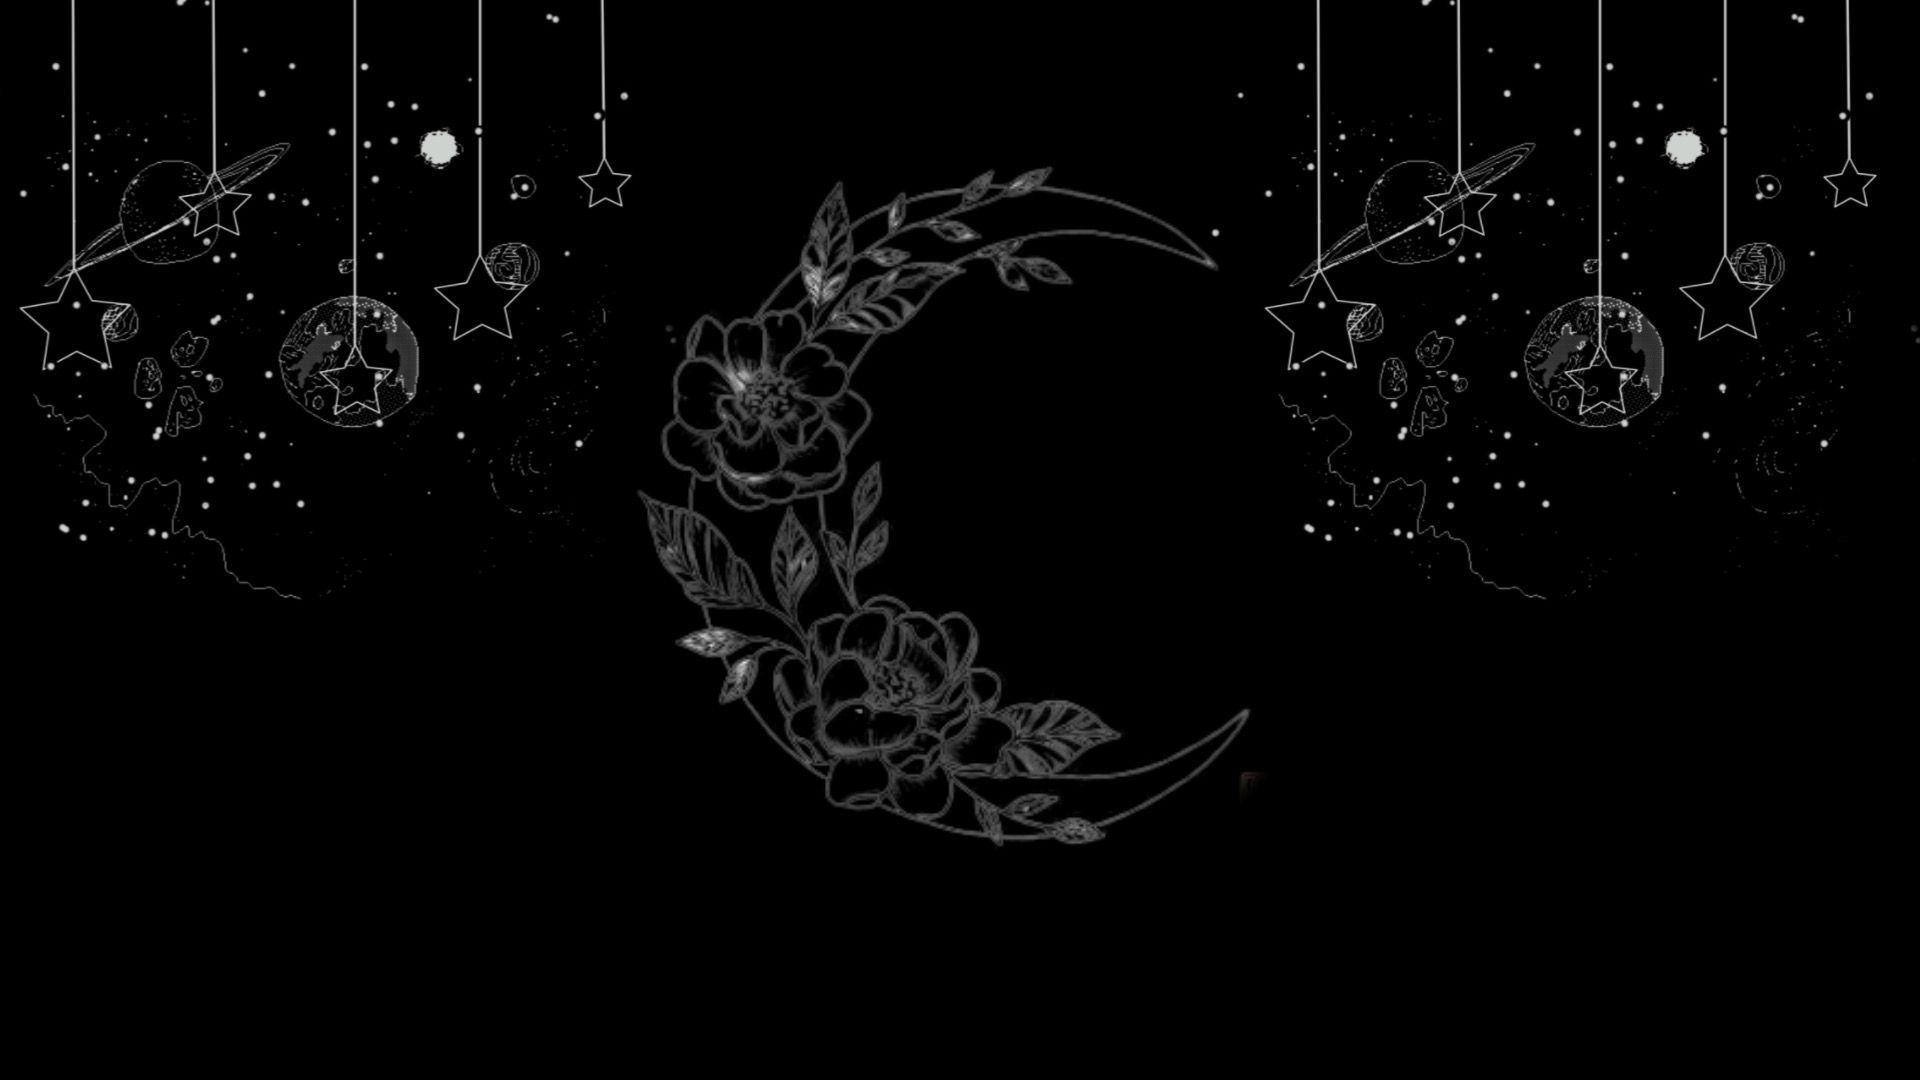 Moon and Stars. Witchy wallpaper, Computer wallpaper desktop wallpaper, Aesthetic desktop wallpaper